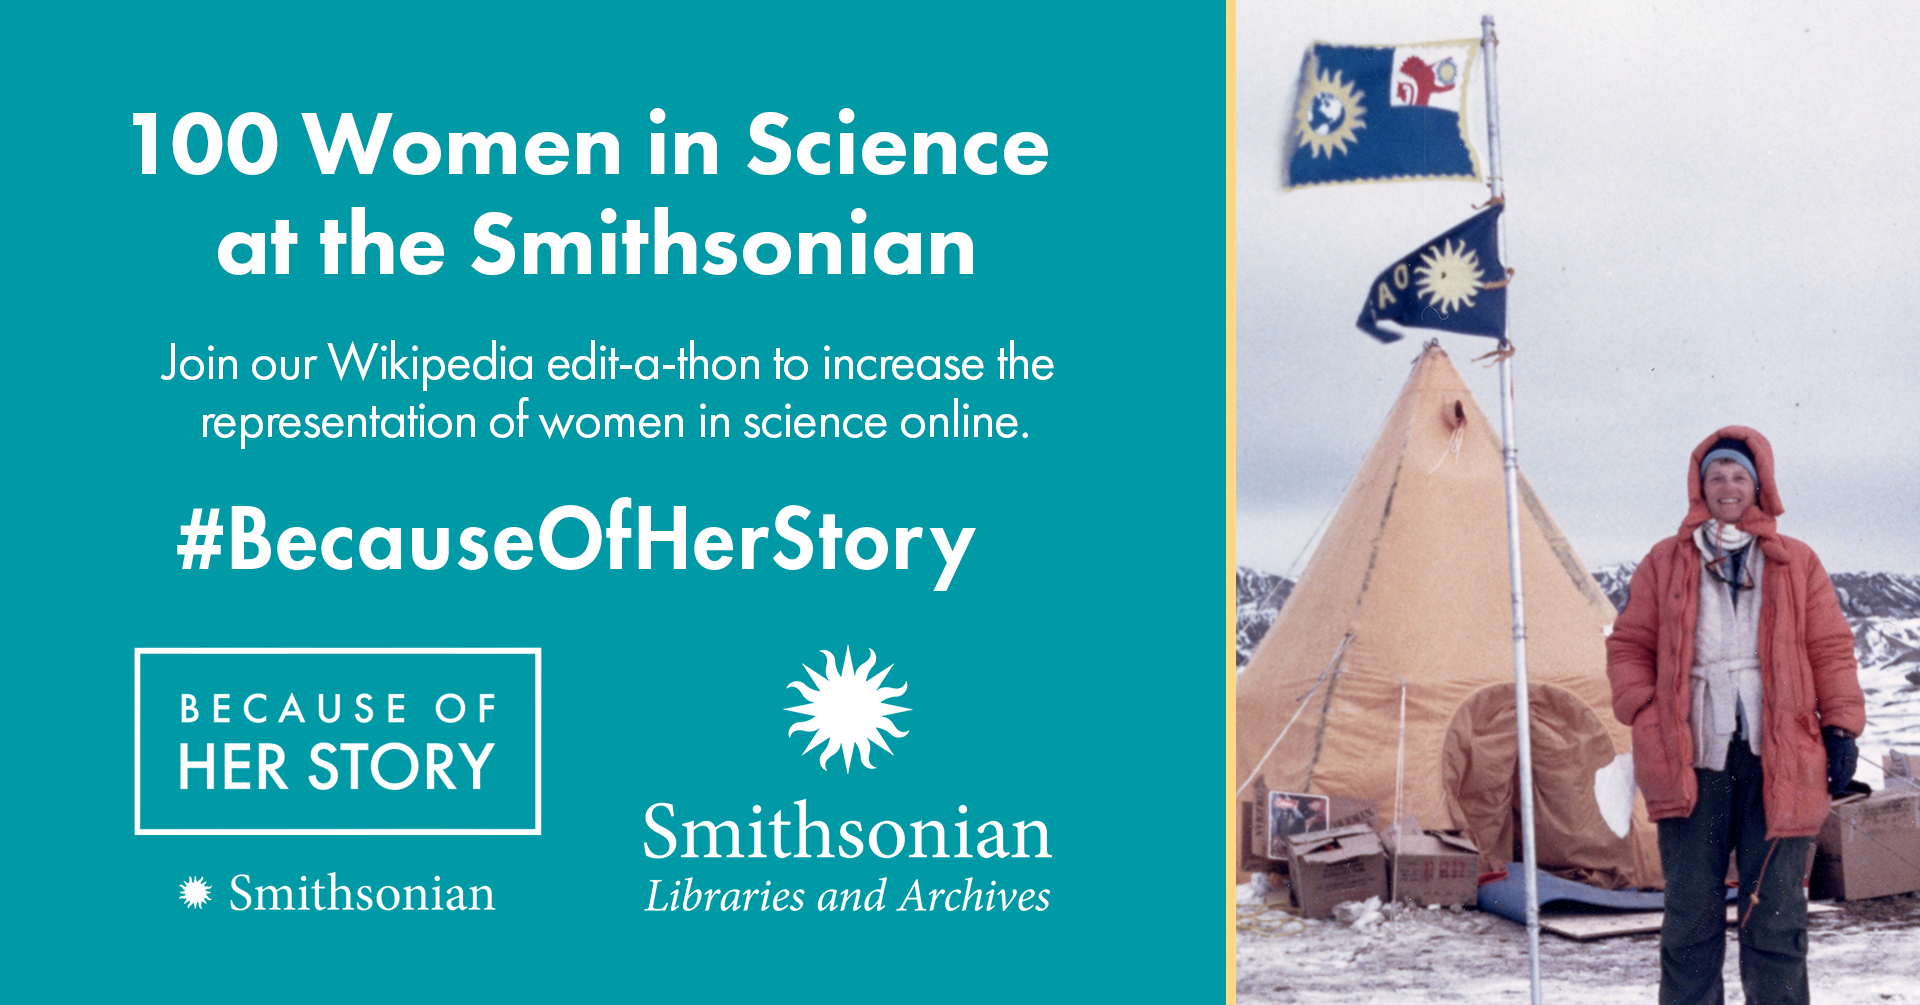 Graphic for the 100 Women in Science at the Smithsonian Wikipedia Edit-a-thon program. It features a